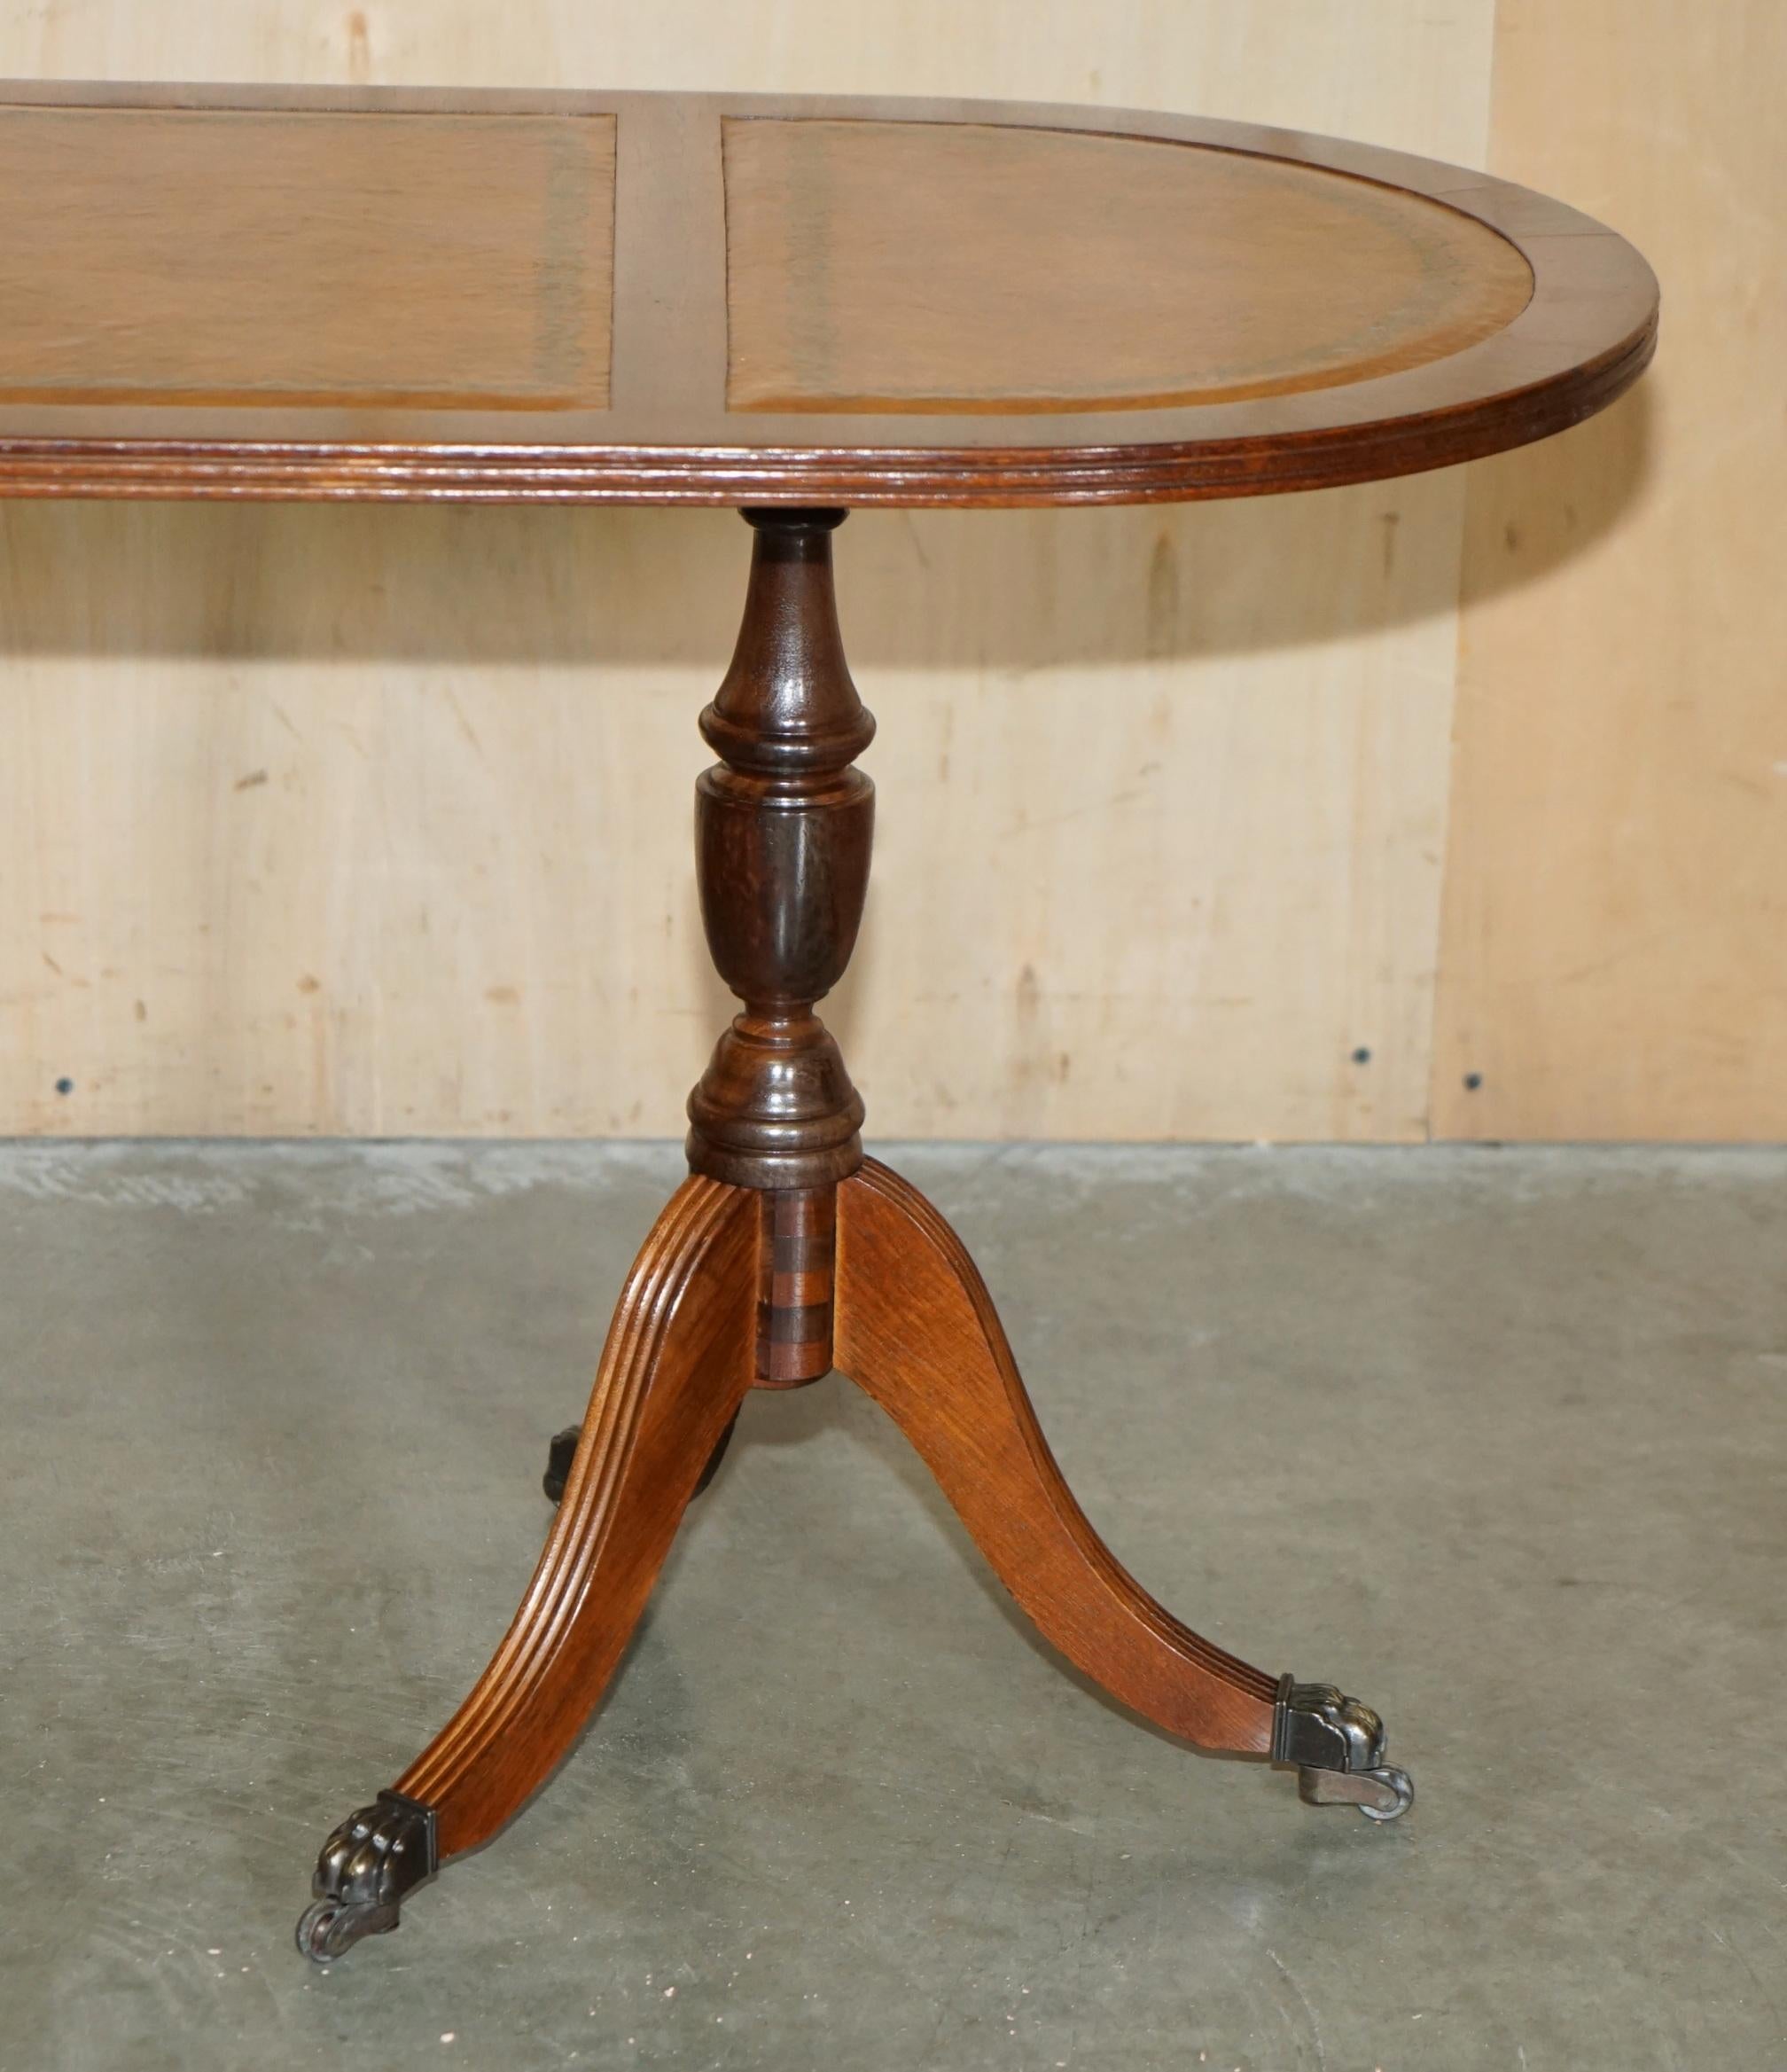 ViNTAGE HANDDYED AND AGED BROWN LEATHER OVAL COFFEE-TABLE MIT LION CASTORS im Angebot 6